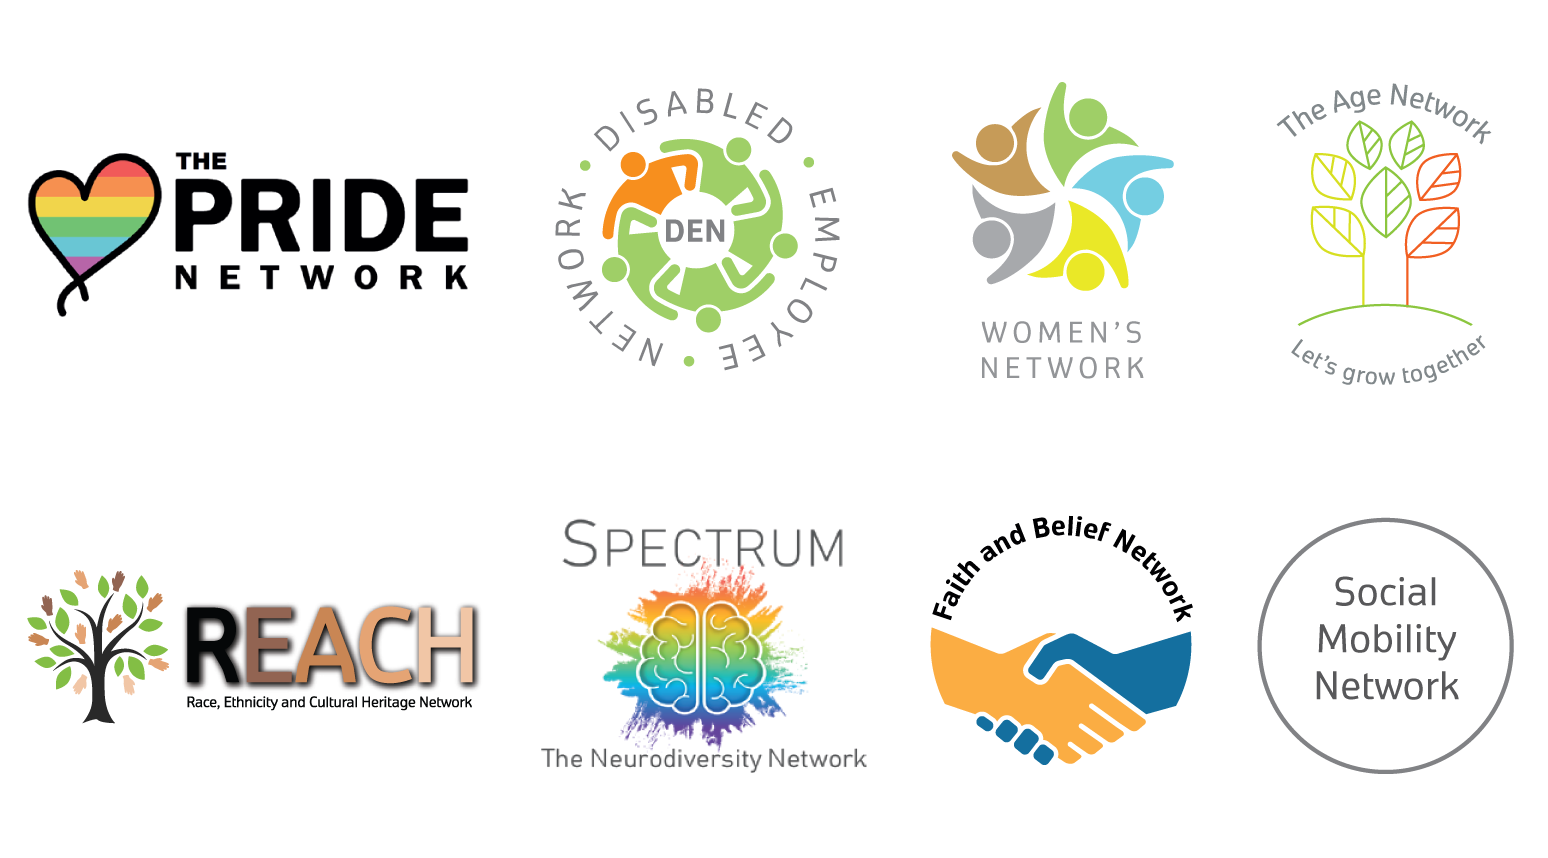 An image showing the logos of HM Land Registry's staff networks which are

Disabled Employee Network (DEN) including the Carers network

REACH (Race, Equality and Cultural Heritage)

The Pride Network (staff network for sexual orientation and gender identity)

Women’s Network

The Age Network

Faith and Belief Network

Social Mobility Network

Spectrum (staff network for neurodiversity)